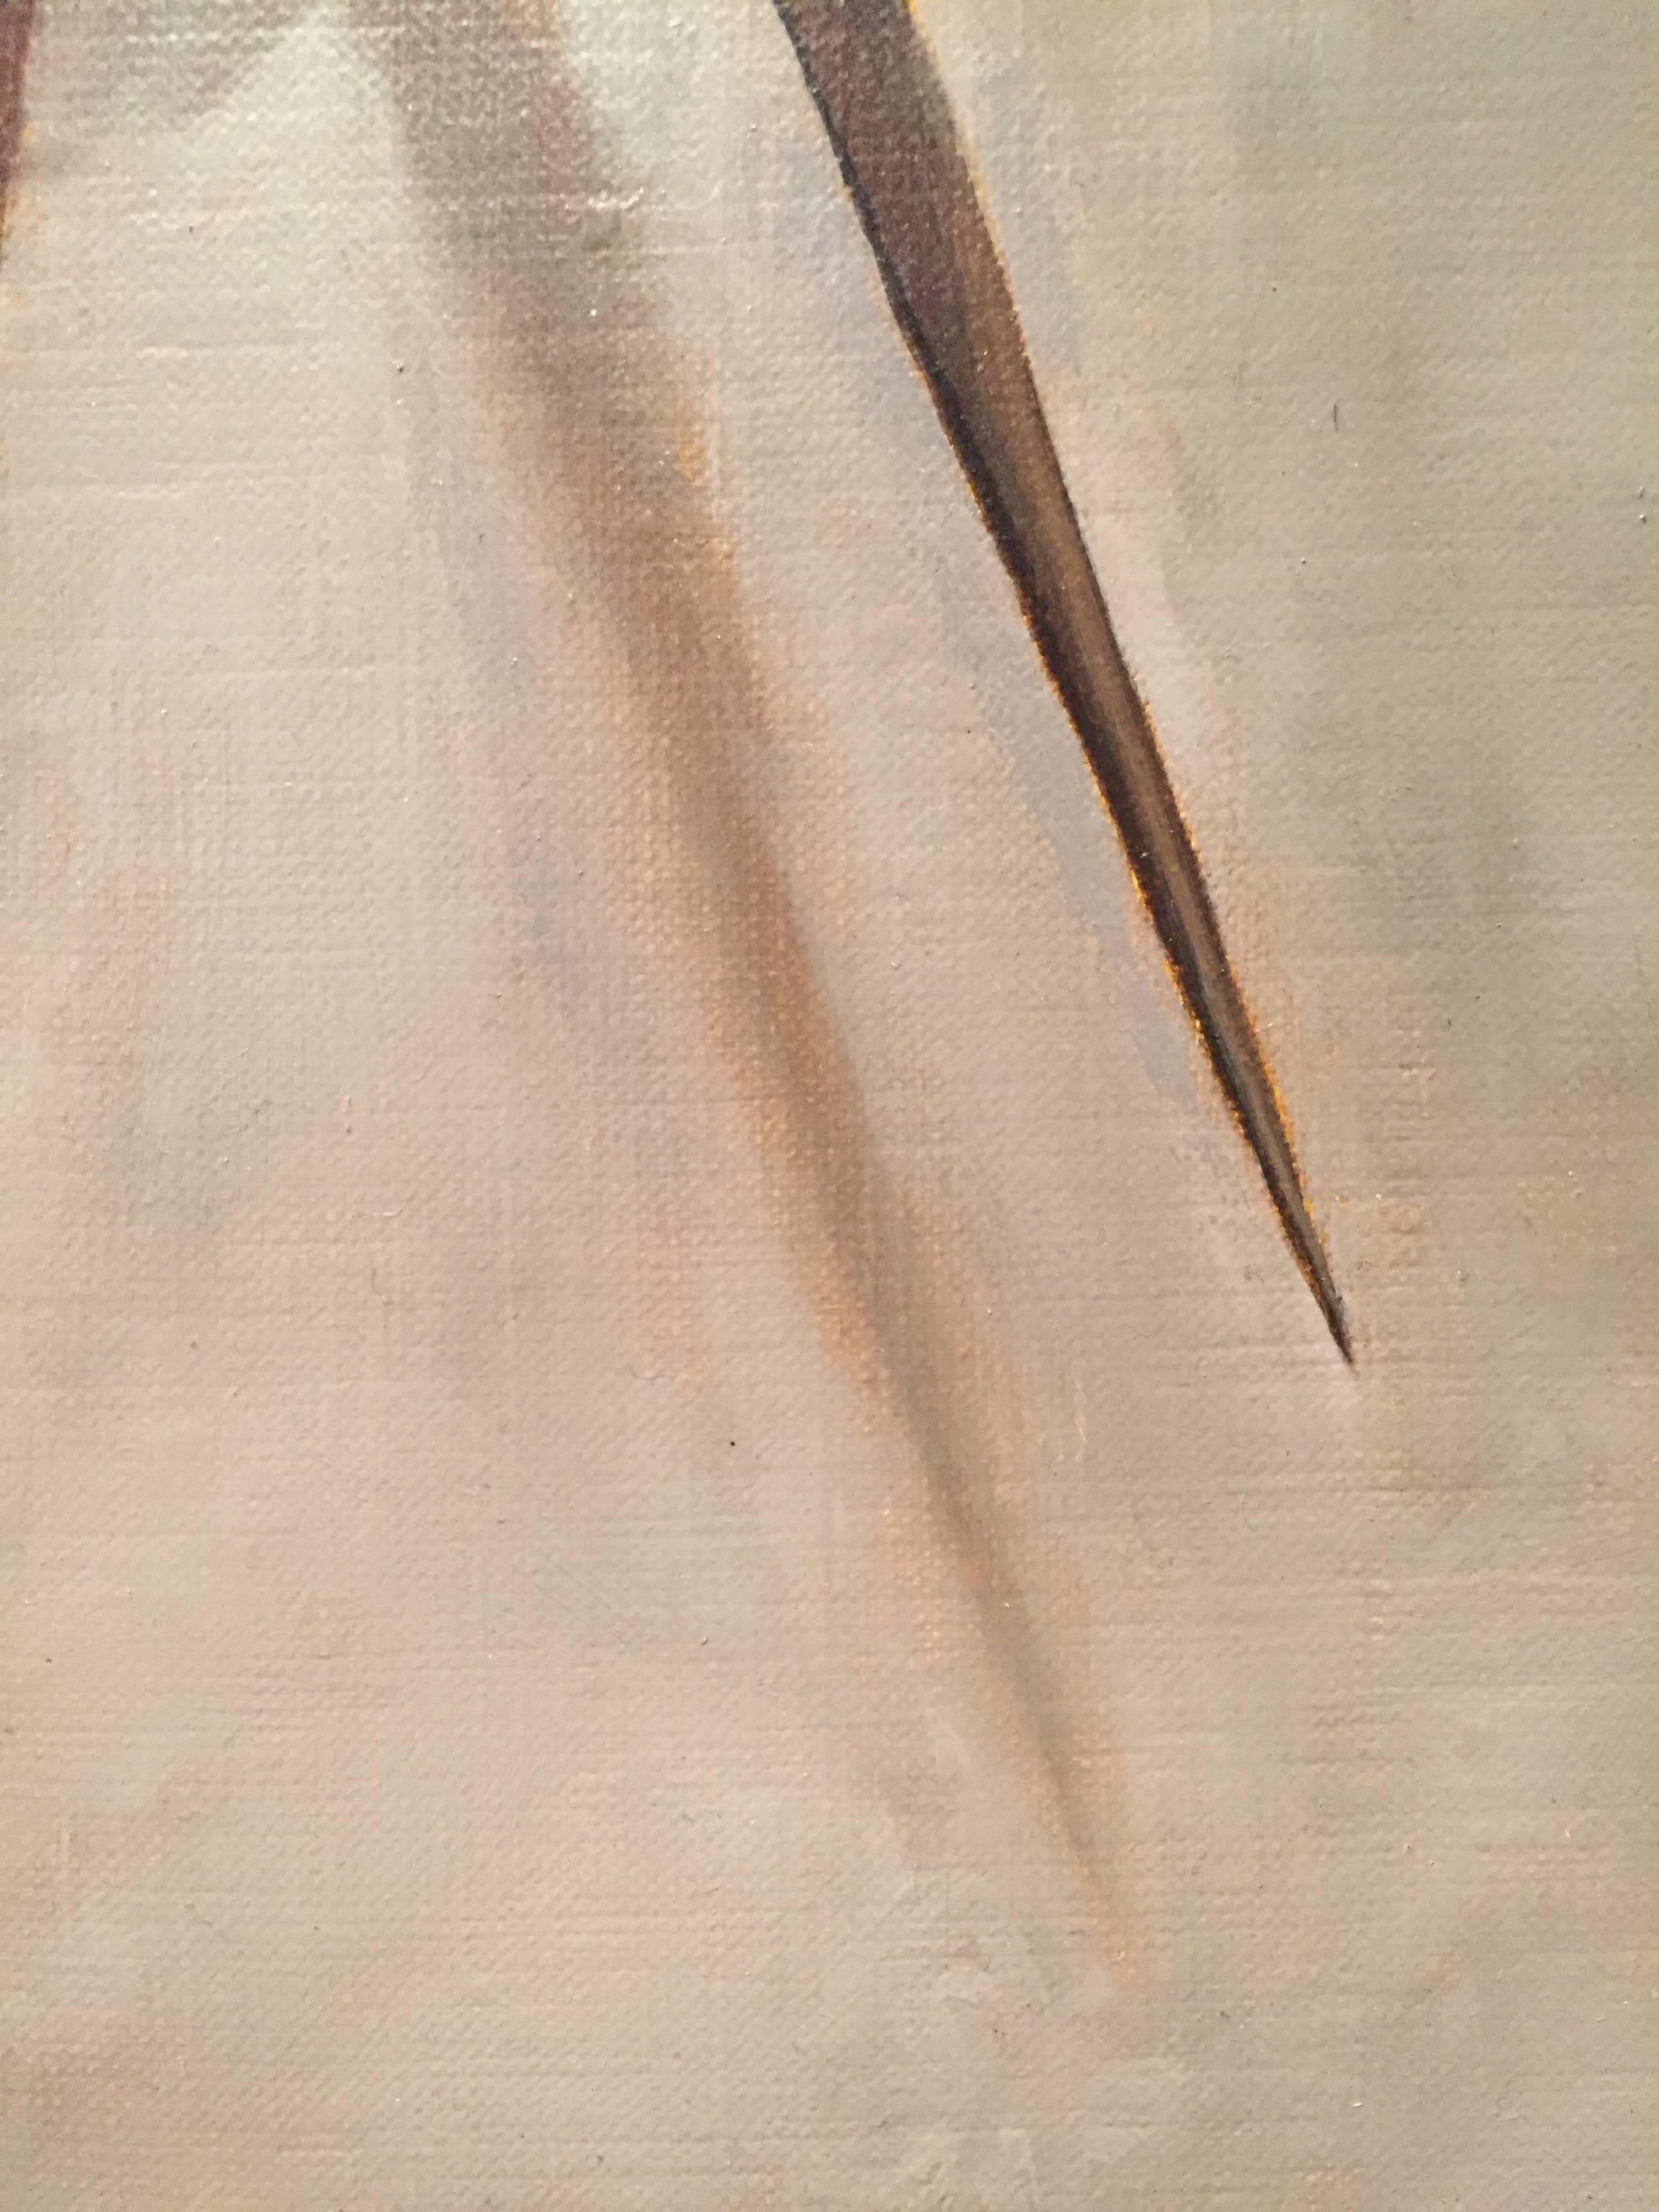 The Architect's Contrappasto - Brown Still-Life Painting by John Morfis